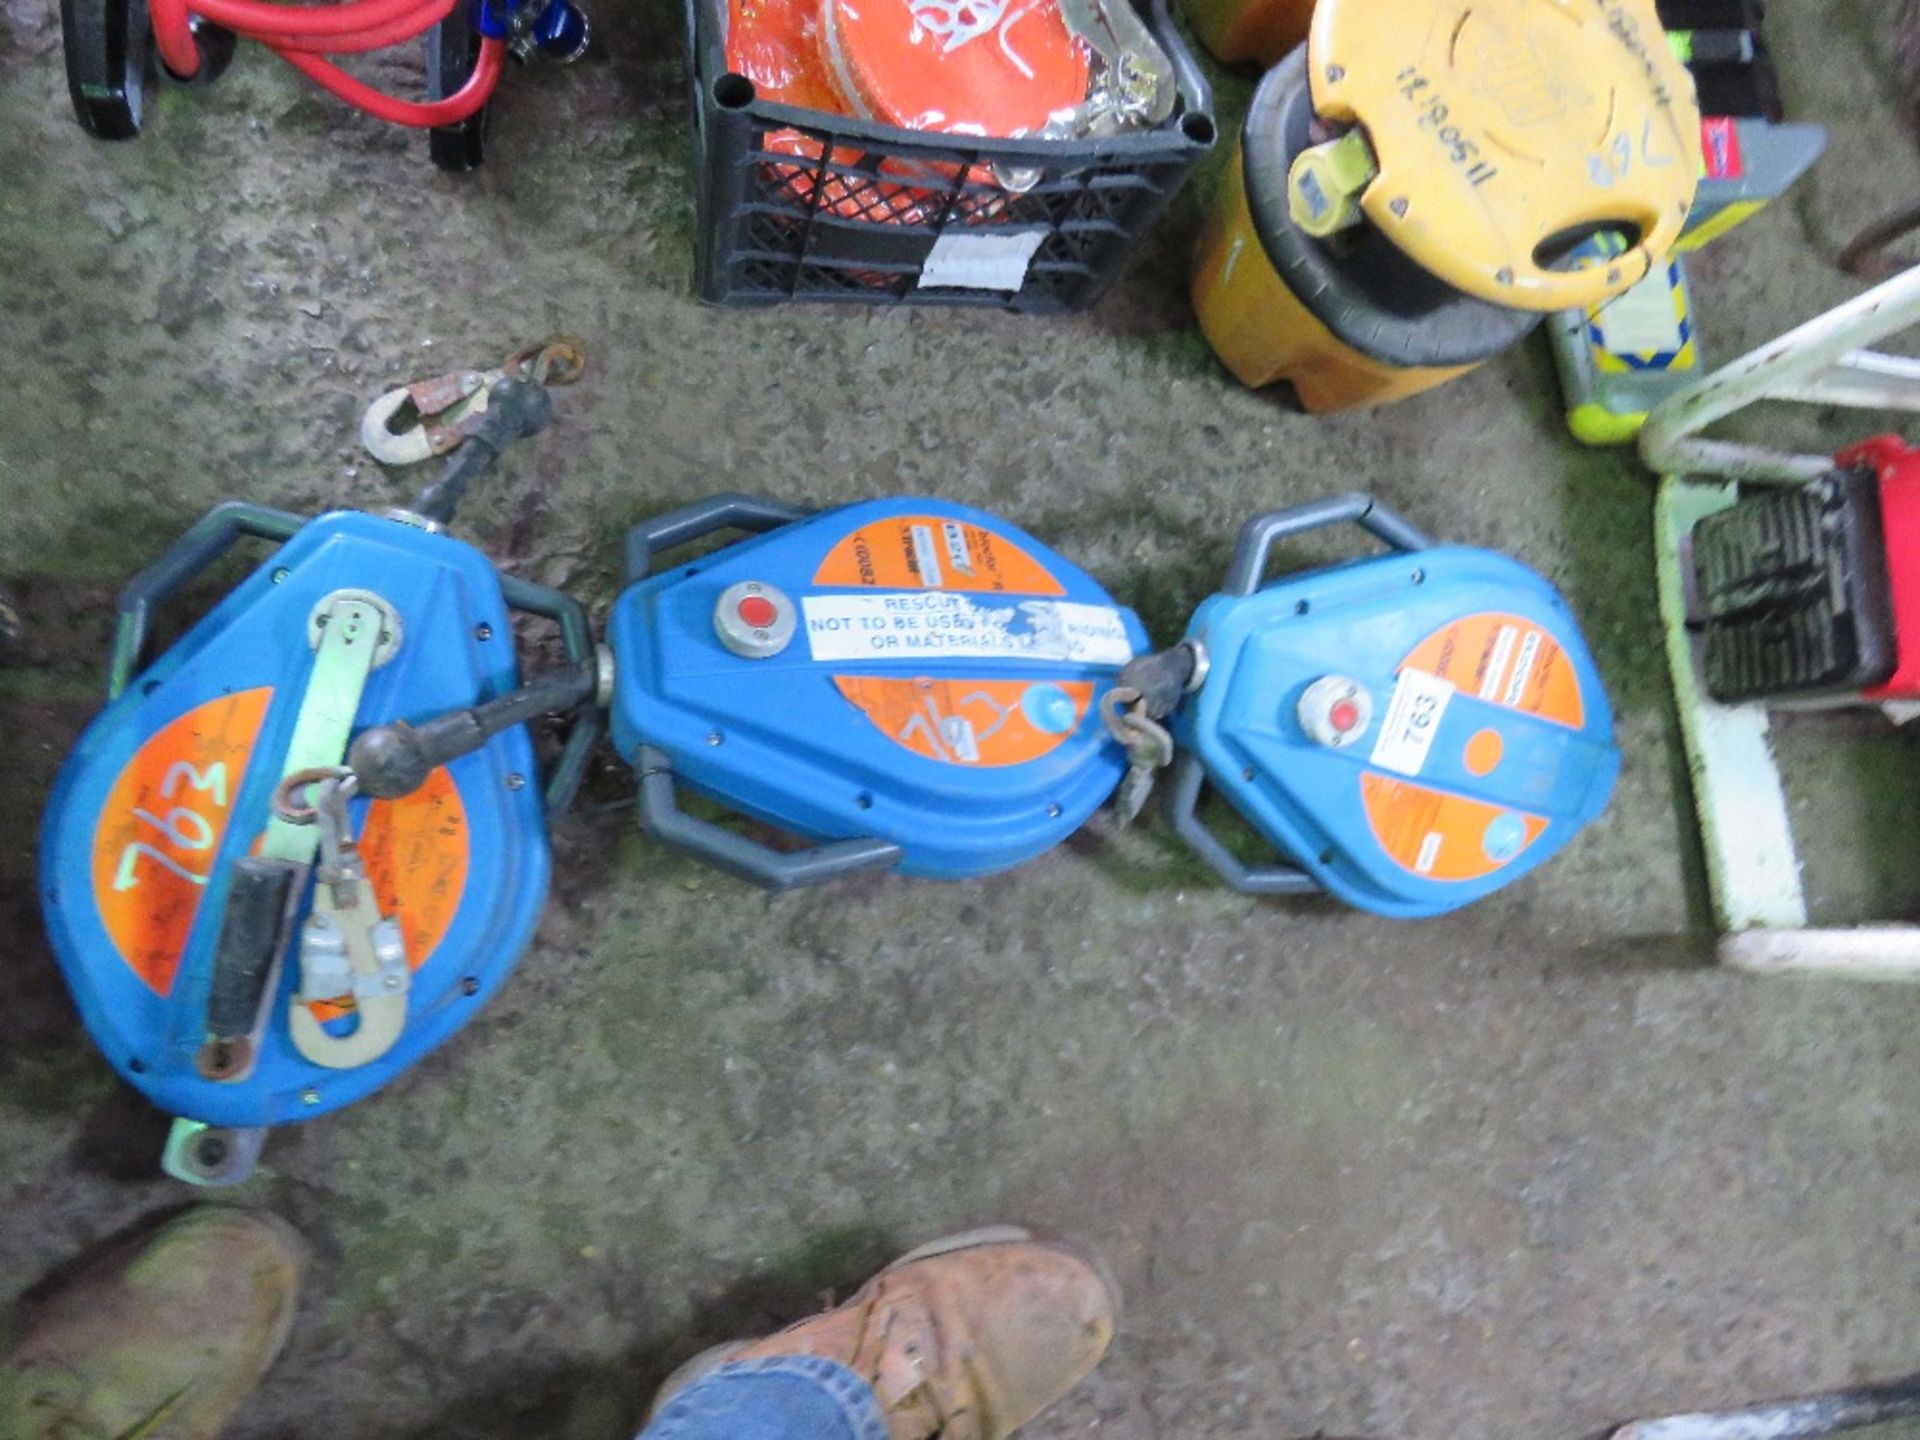 3 X MAN RECOVERY WINCHES, UNTESTED.